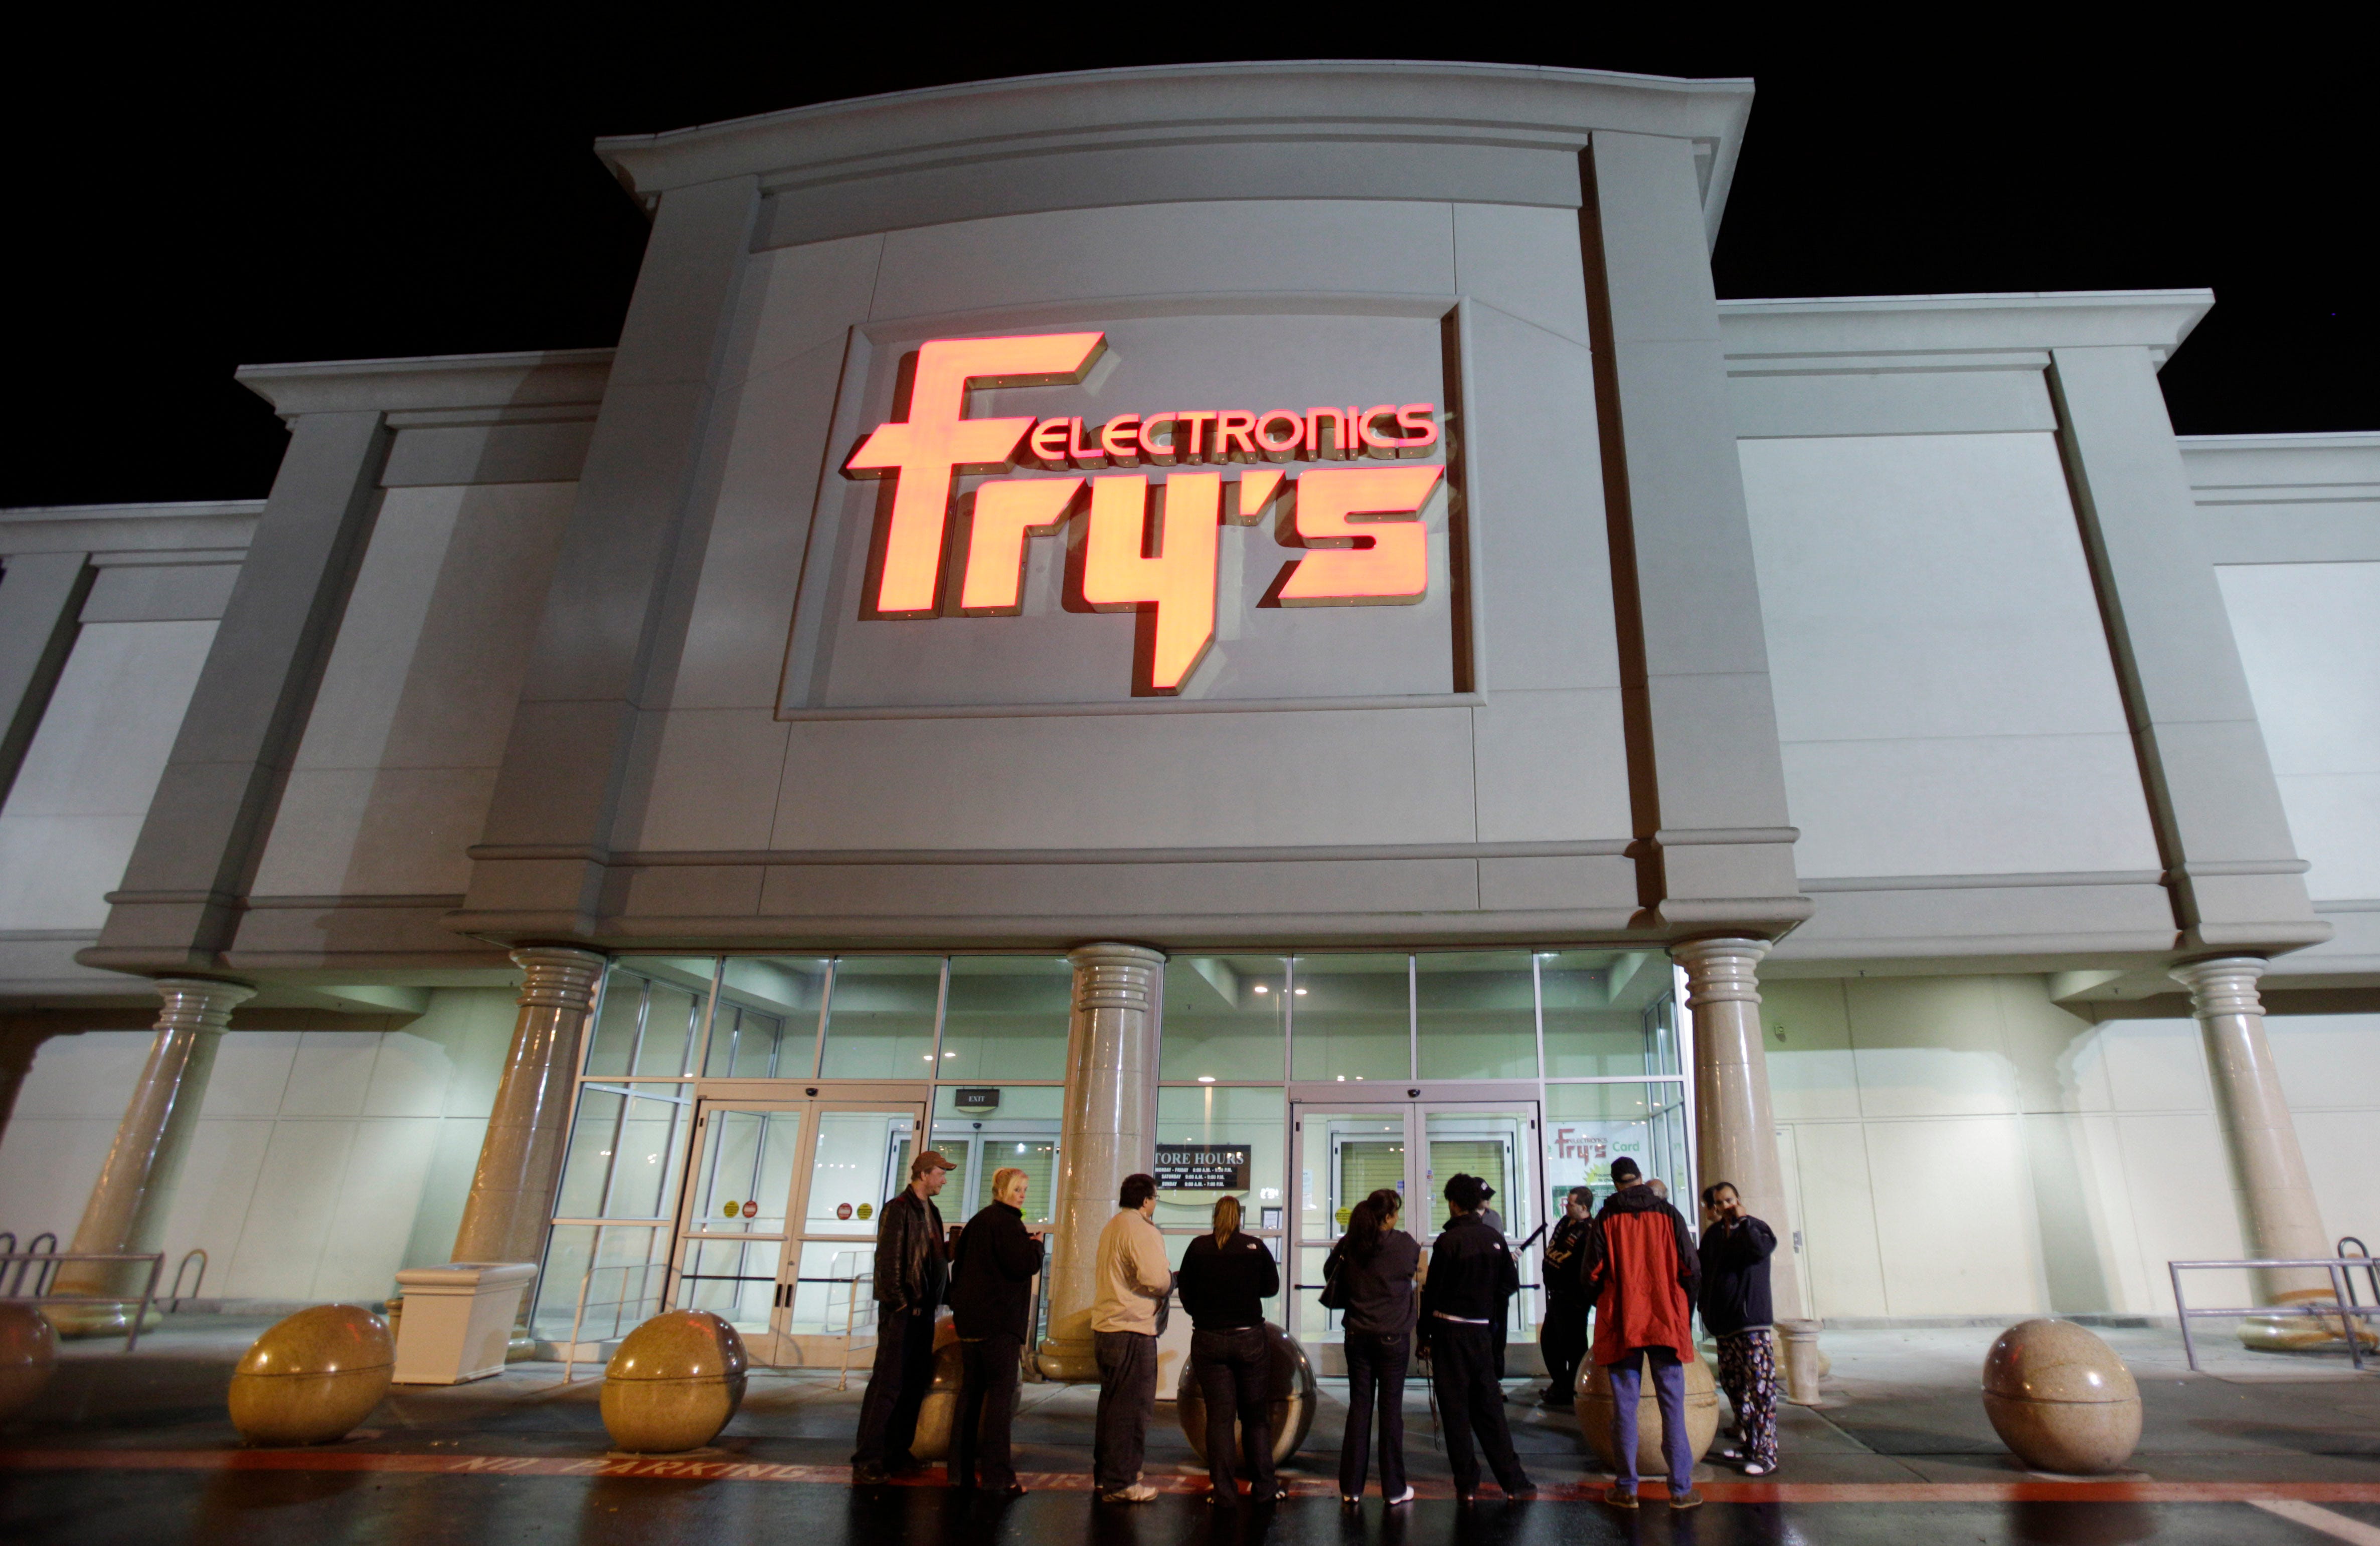 Fry's Electronics has gone out of business after 36 years